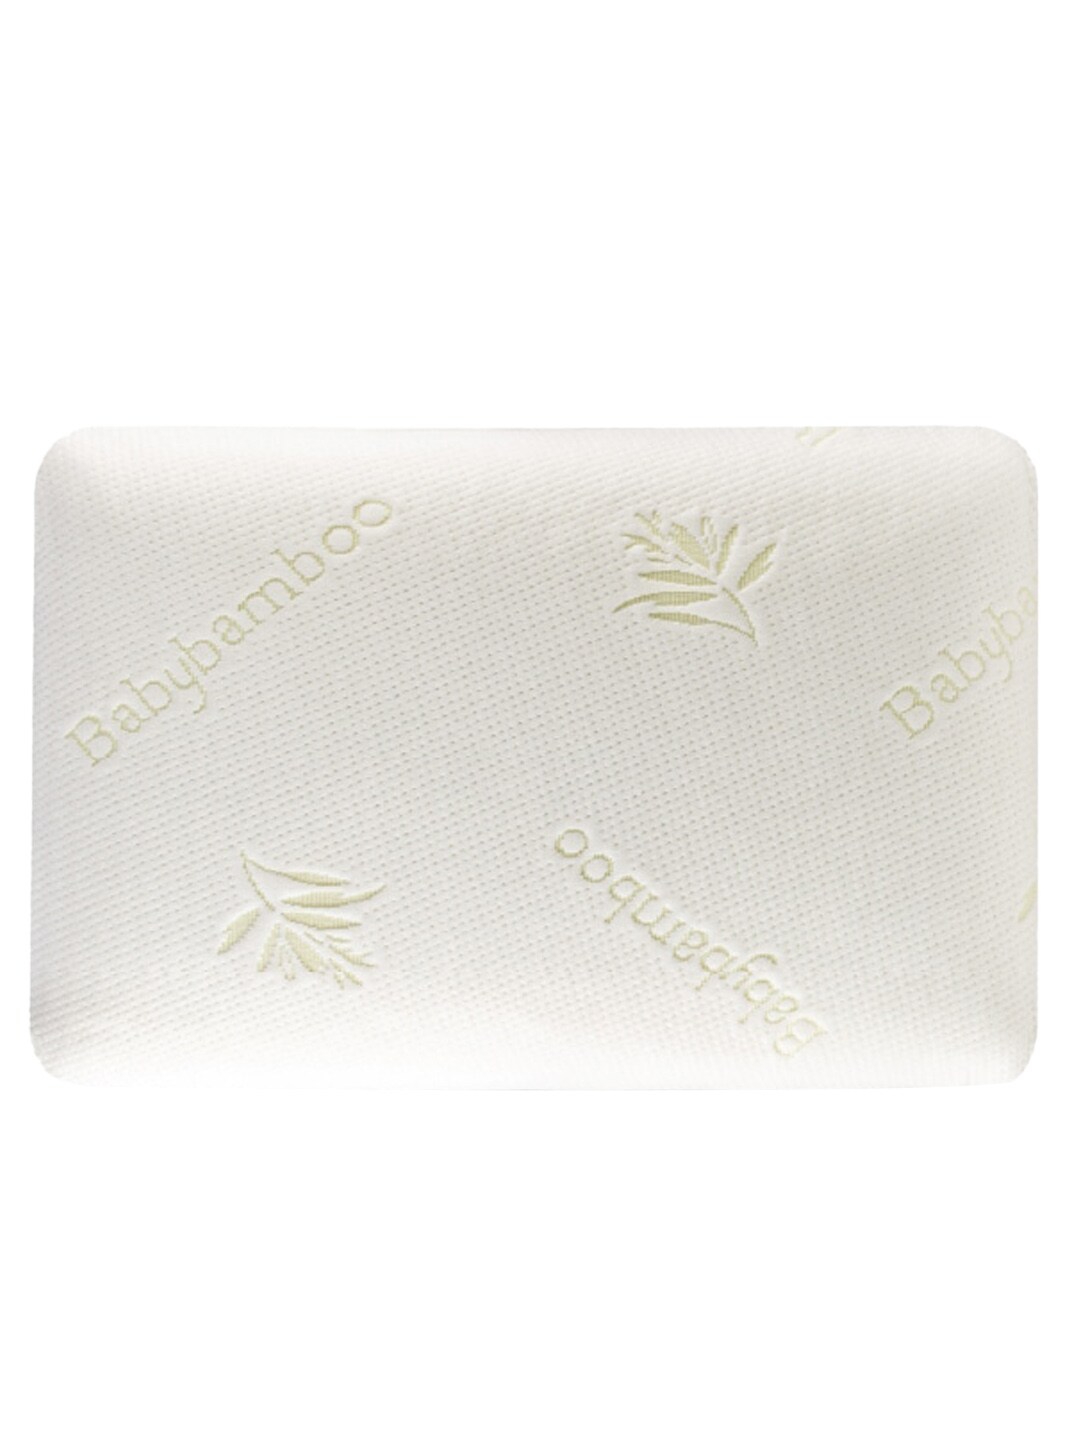 The White Willow Green Cooling Gel Memory Foam Thin Bed Pillow Price in India